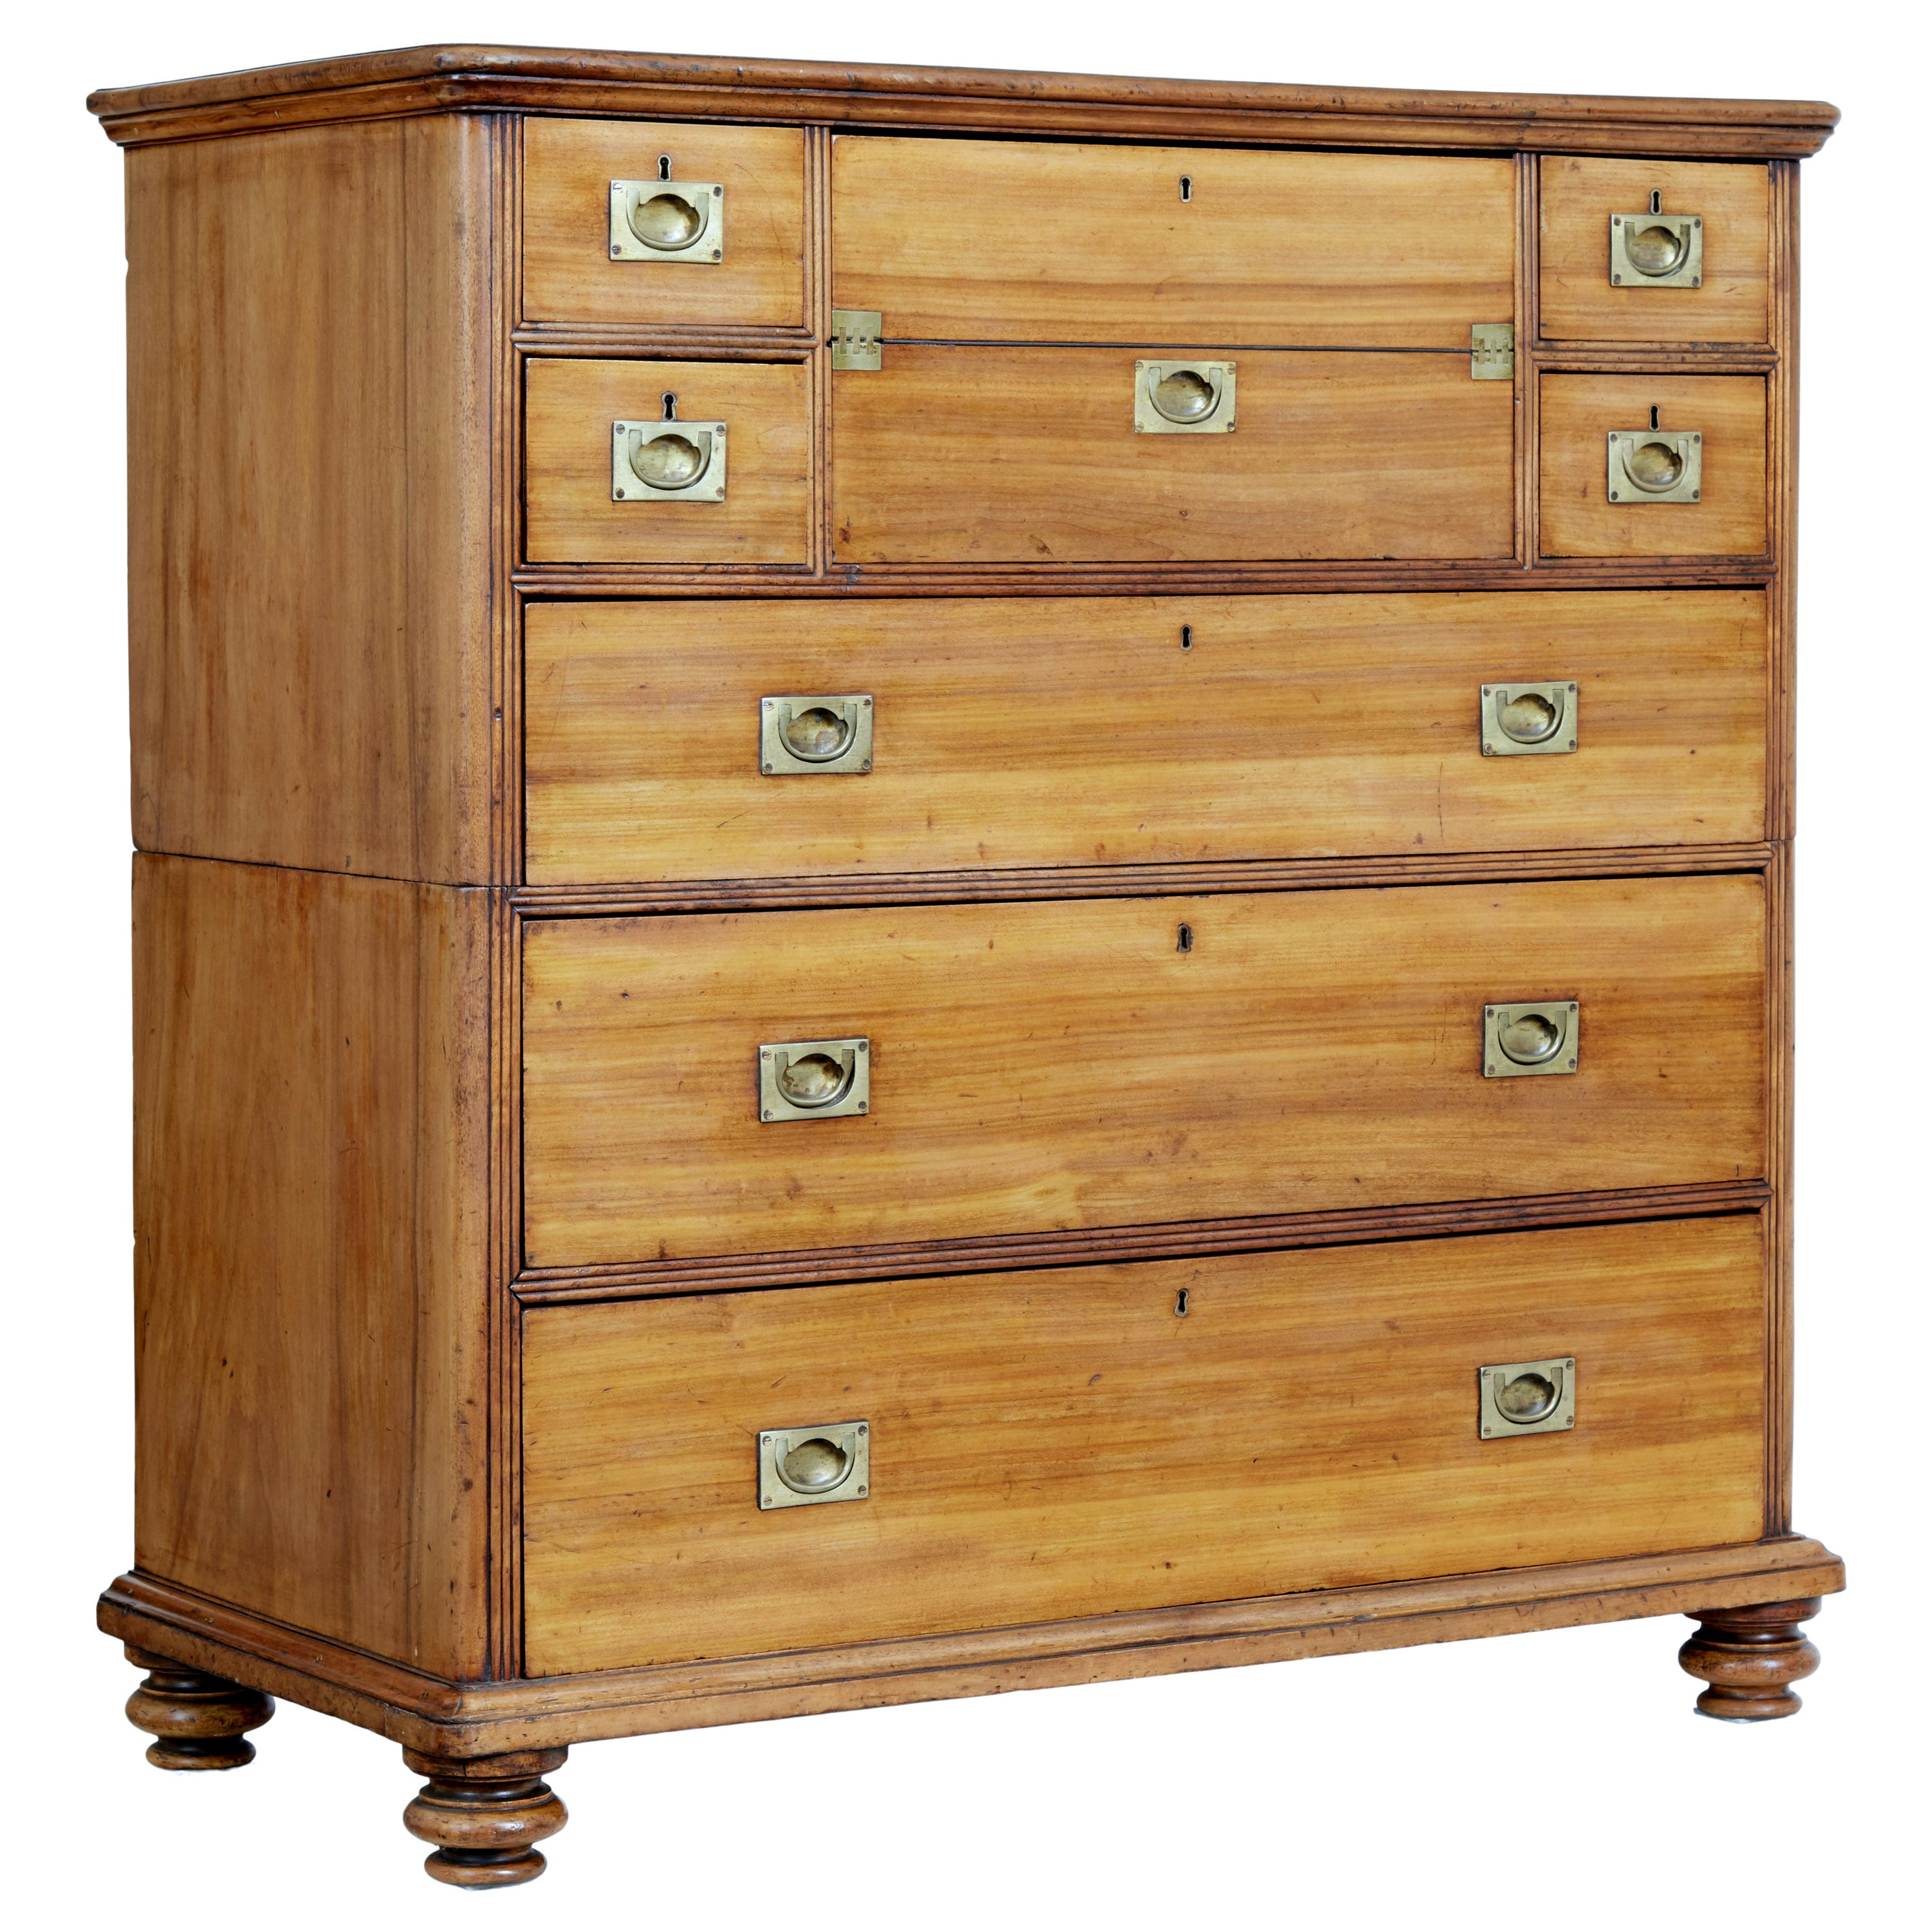 19th Century Camphor Campaign Chest of Drawers Writing Slope